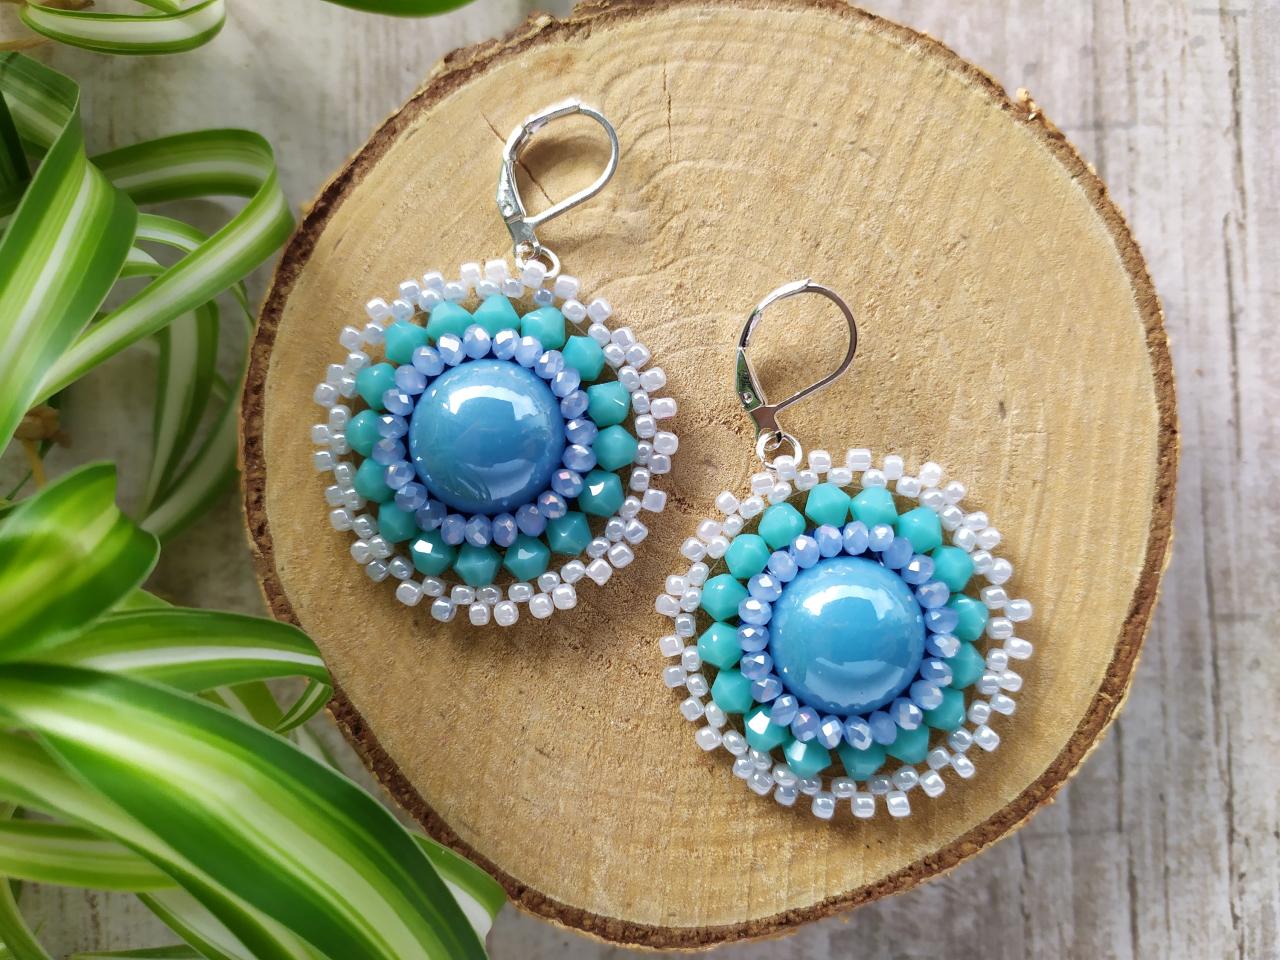 Celestial Collection: Light Blue Embroidered Earrings, Delicate Bead Embroidery Earrings, Winter Wonderland Boho Earrings, Ice Queen Dangles